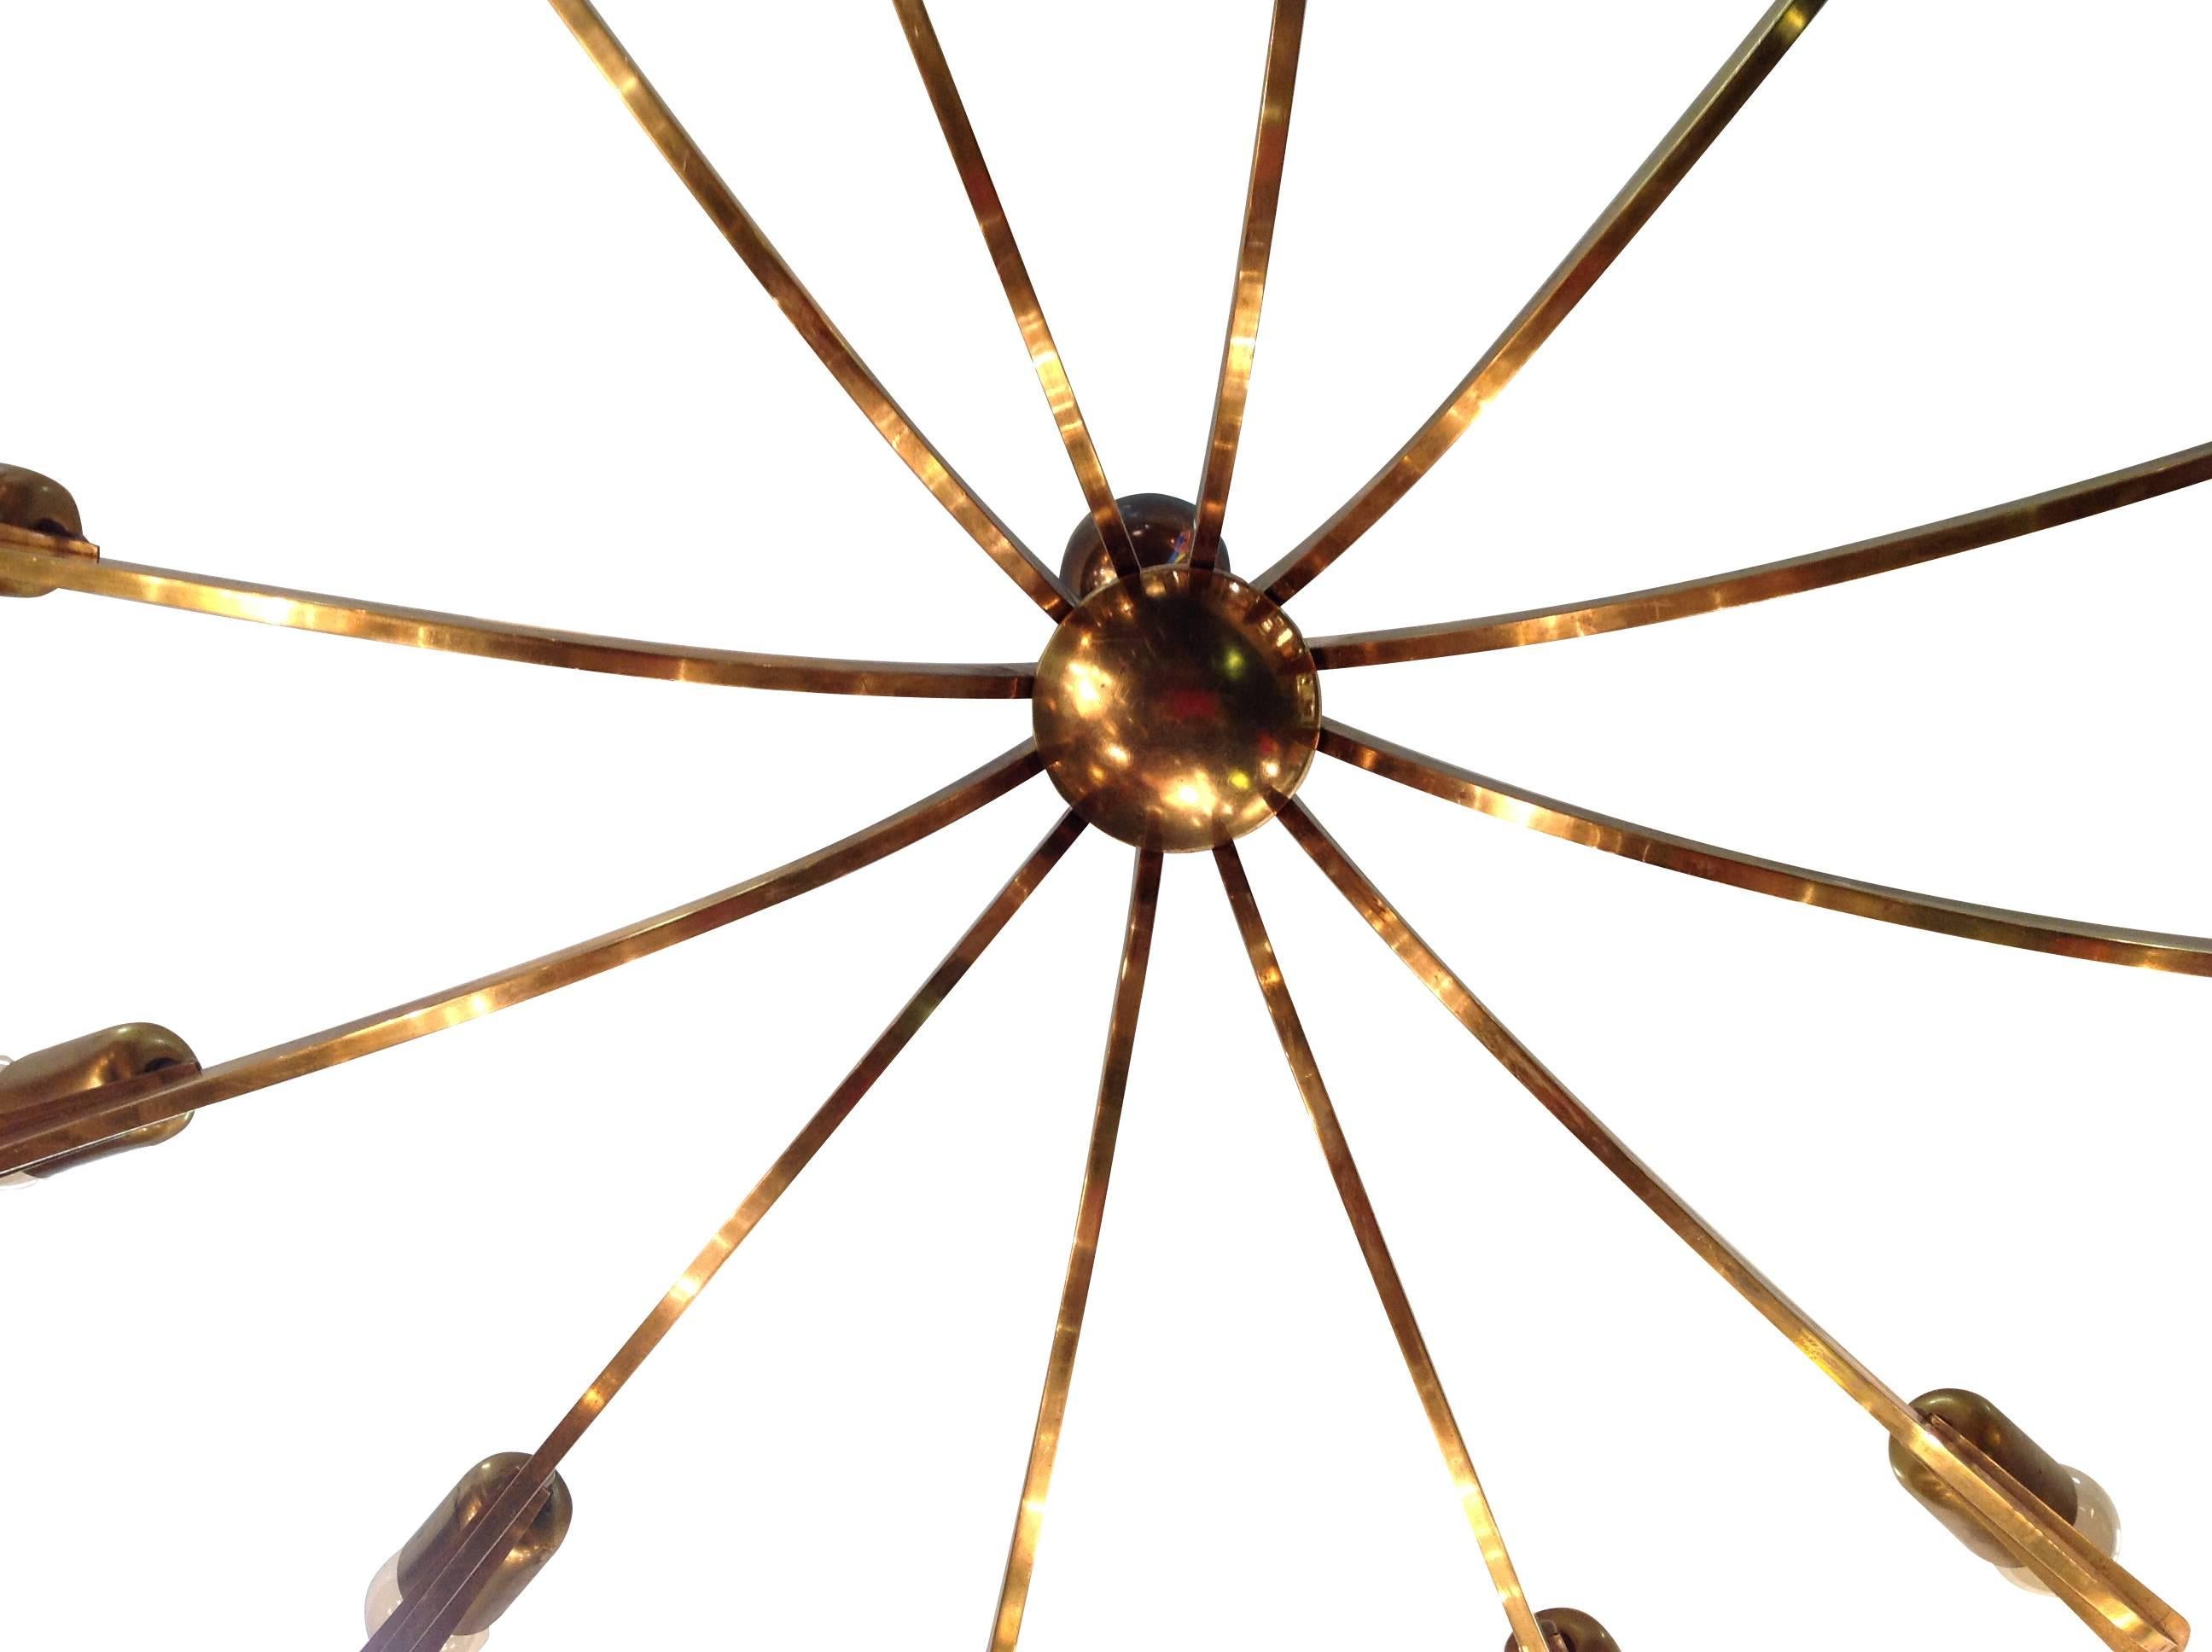 A Stilnovo brass chandelier with 12 arms each with a brass fitting on the end, suspended from a brass domed centre, chain and ceiling fitting. Re-wired and PAT tested with new light fittings on each arm.